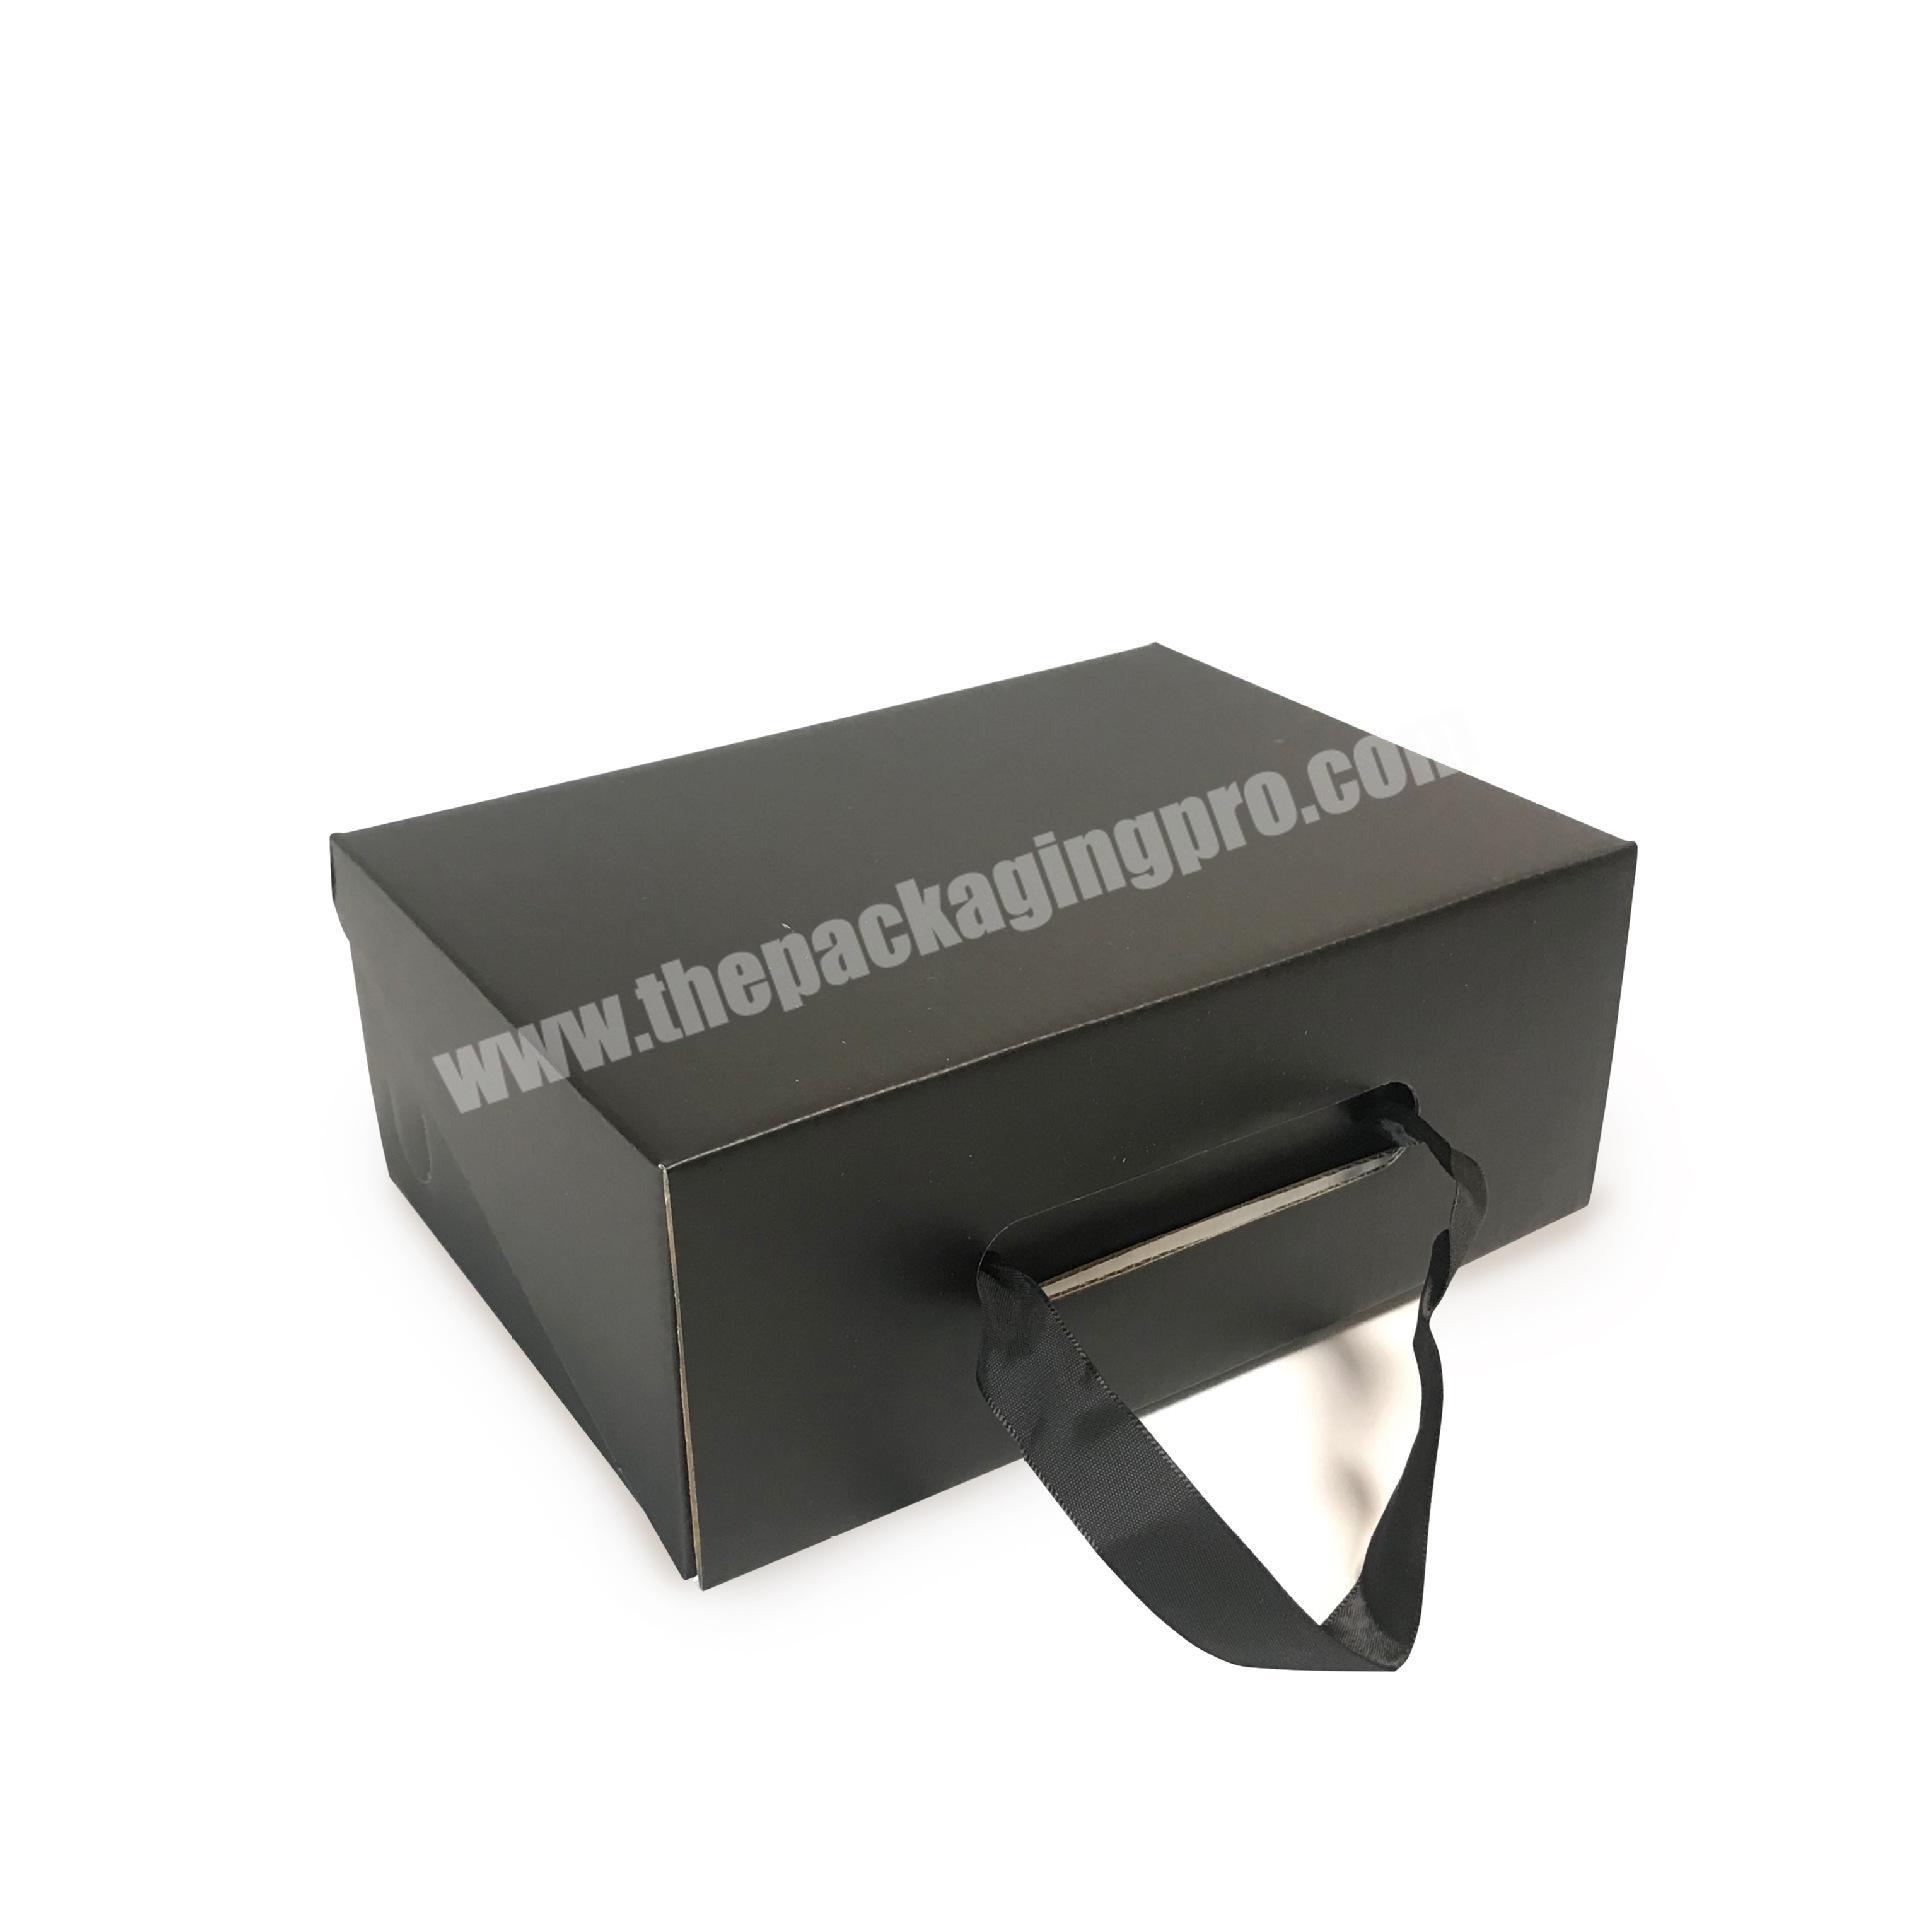 High-quality product LOGO can be customized packaging box for luxury paper packaging of shoes